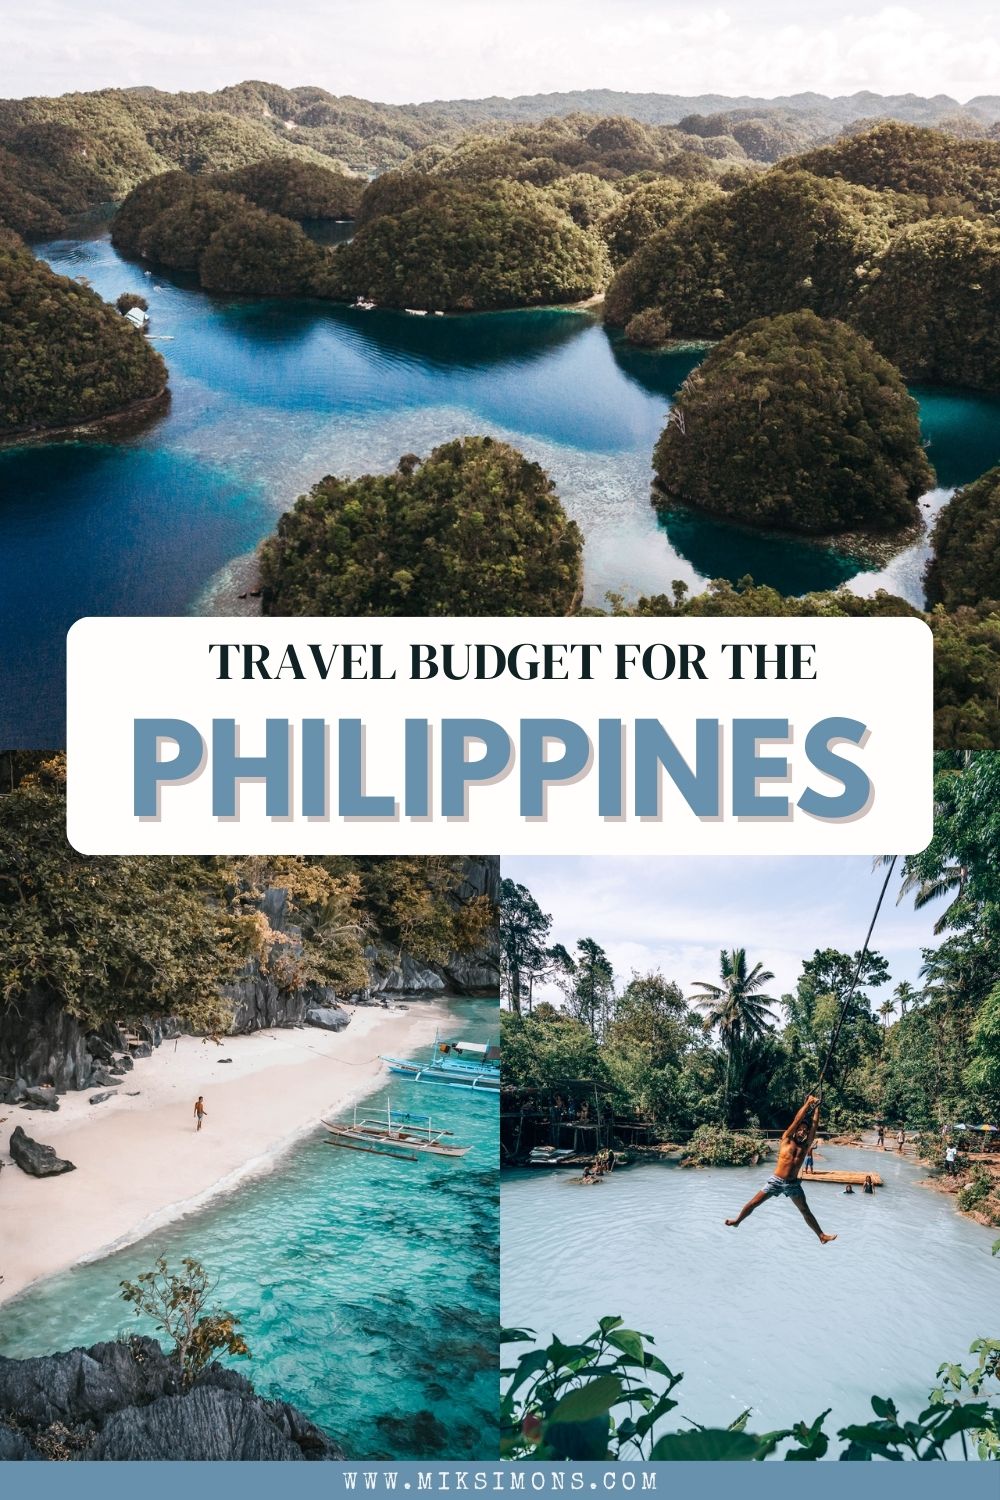 TRAVEL THE PHILIPPINES ON A BUDGET - COMPLETE COST BREAKDOWN